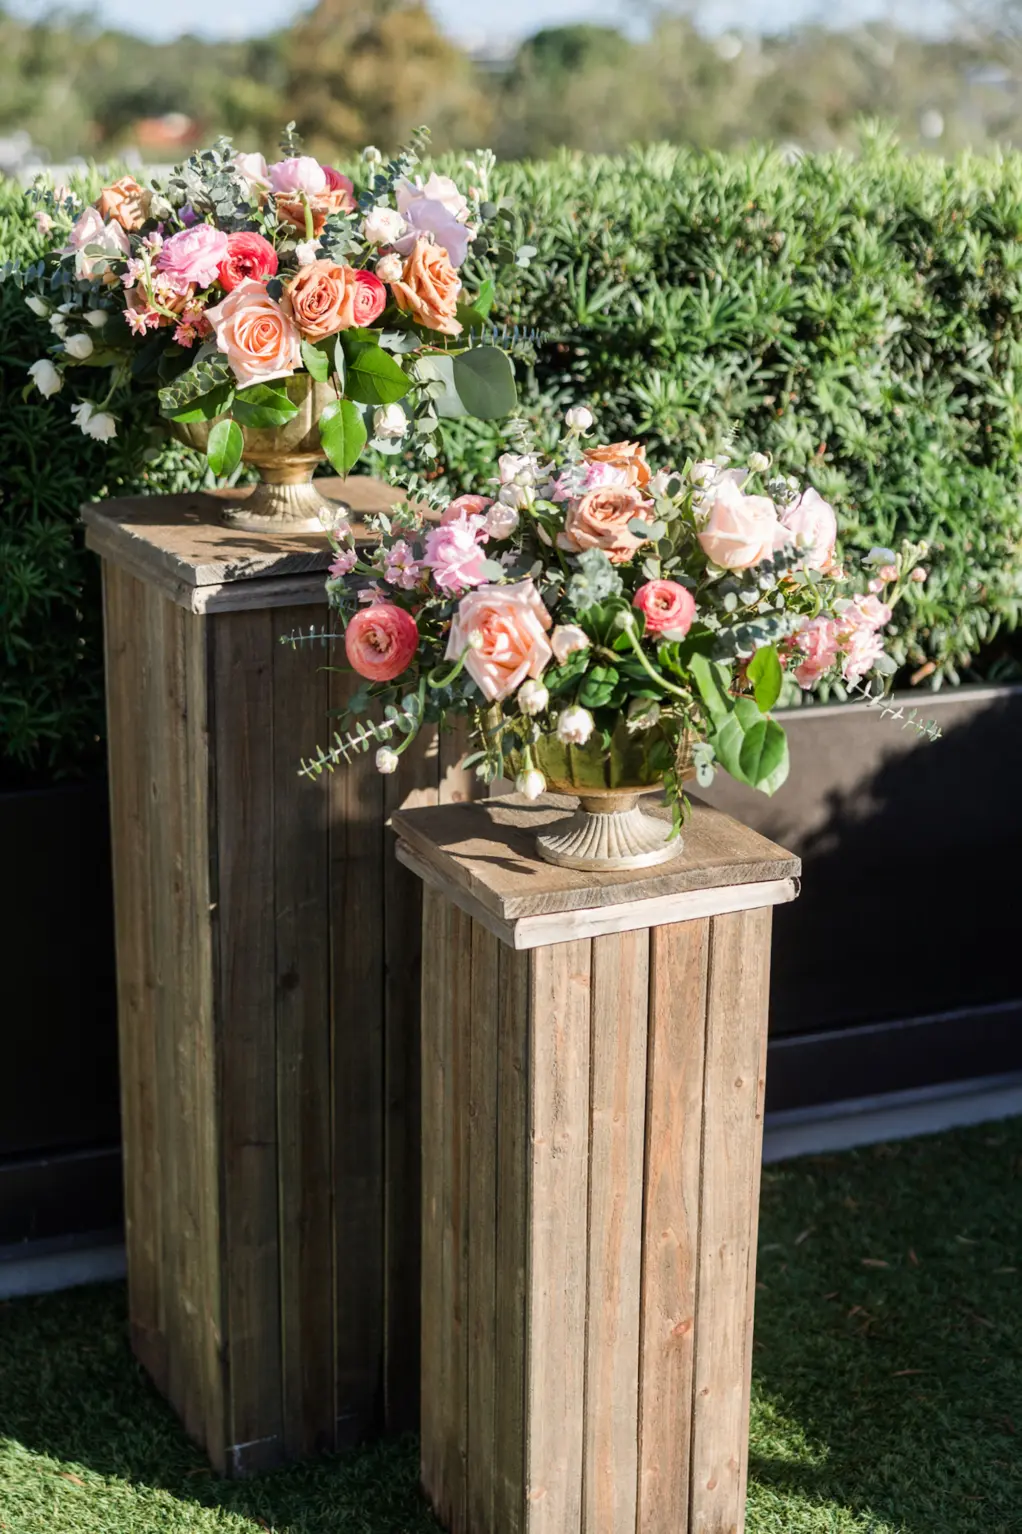 Wooden Flower Altar Stands with Pink, Peach, and Orange Rose Wedding Ceremony Altar Decor Ideas